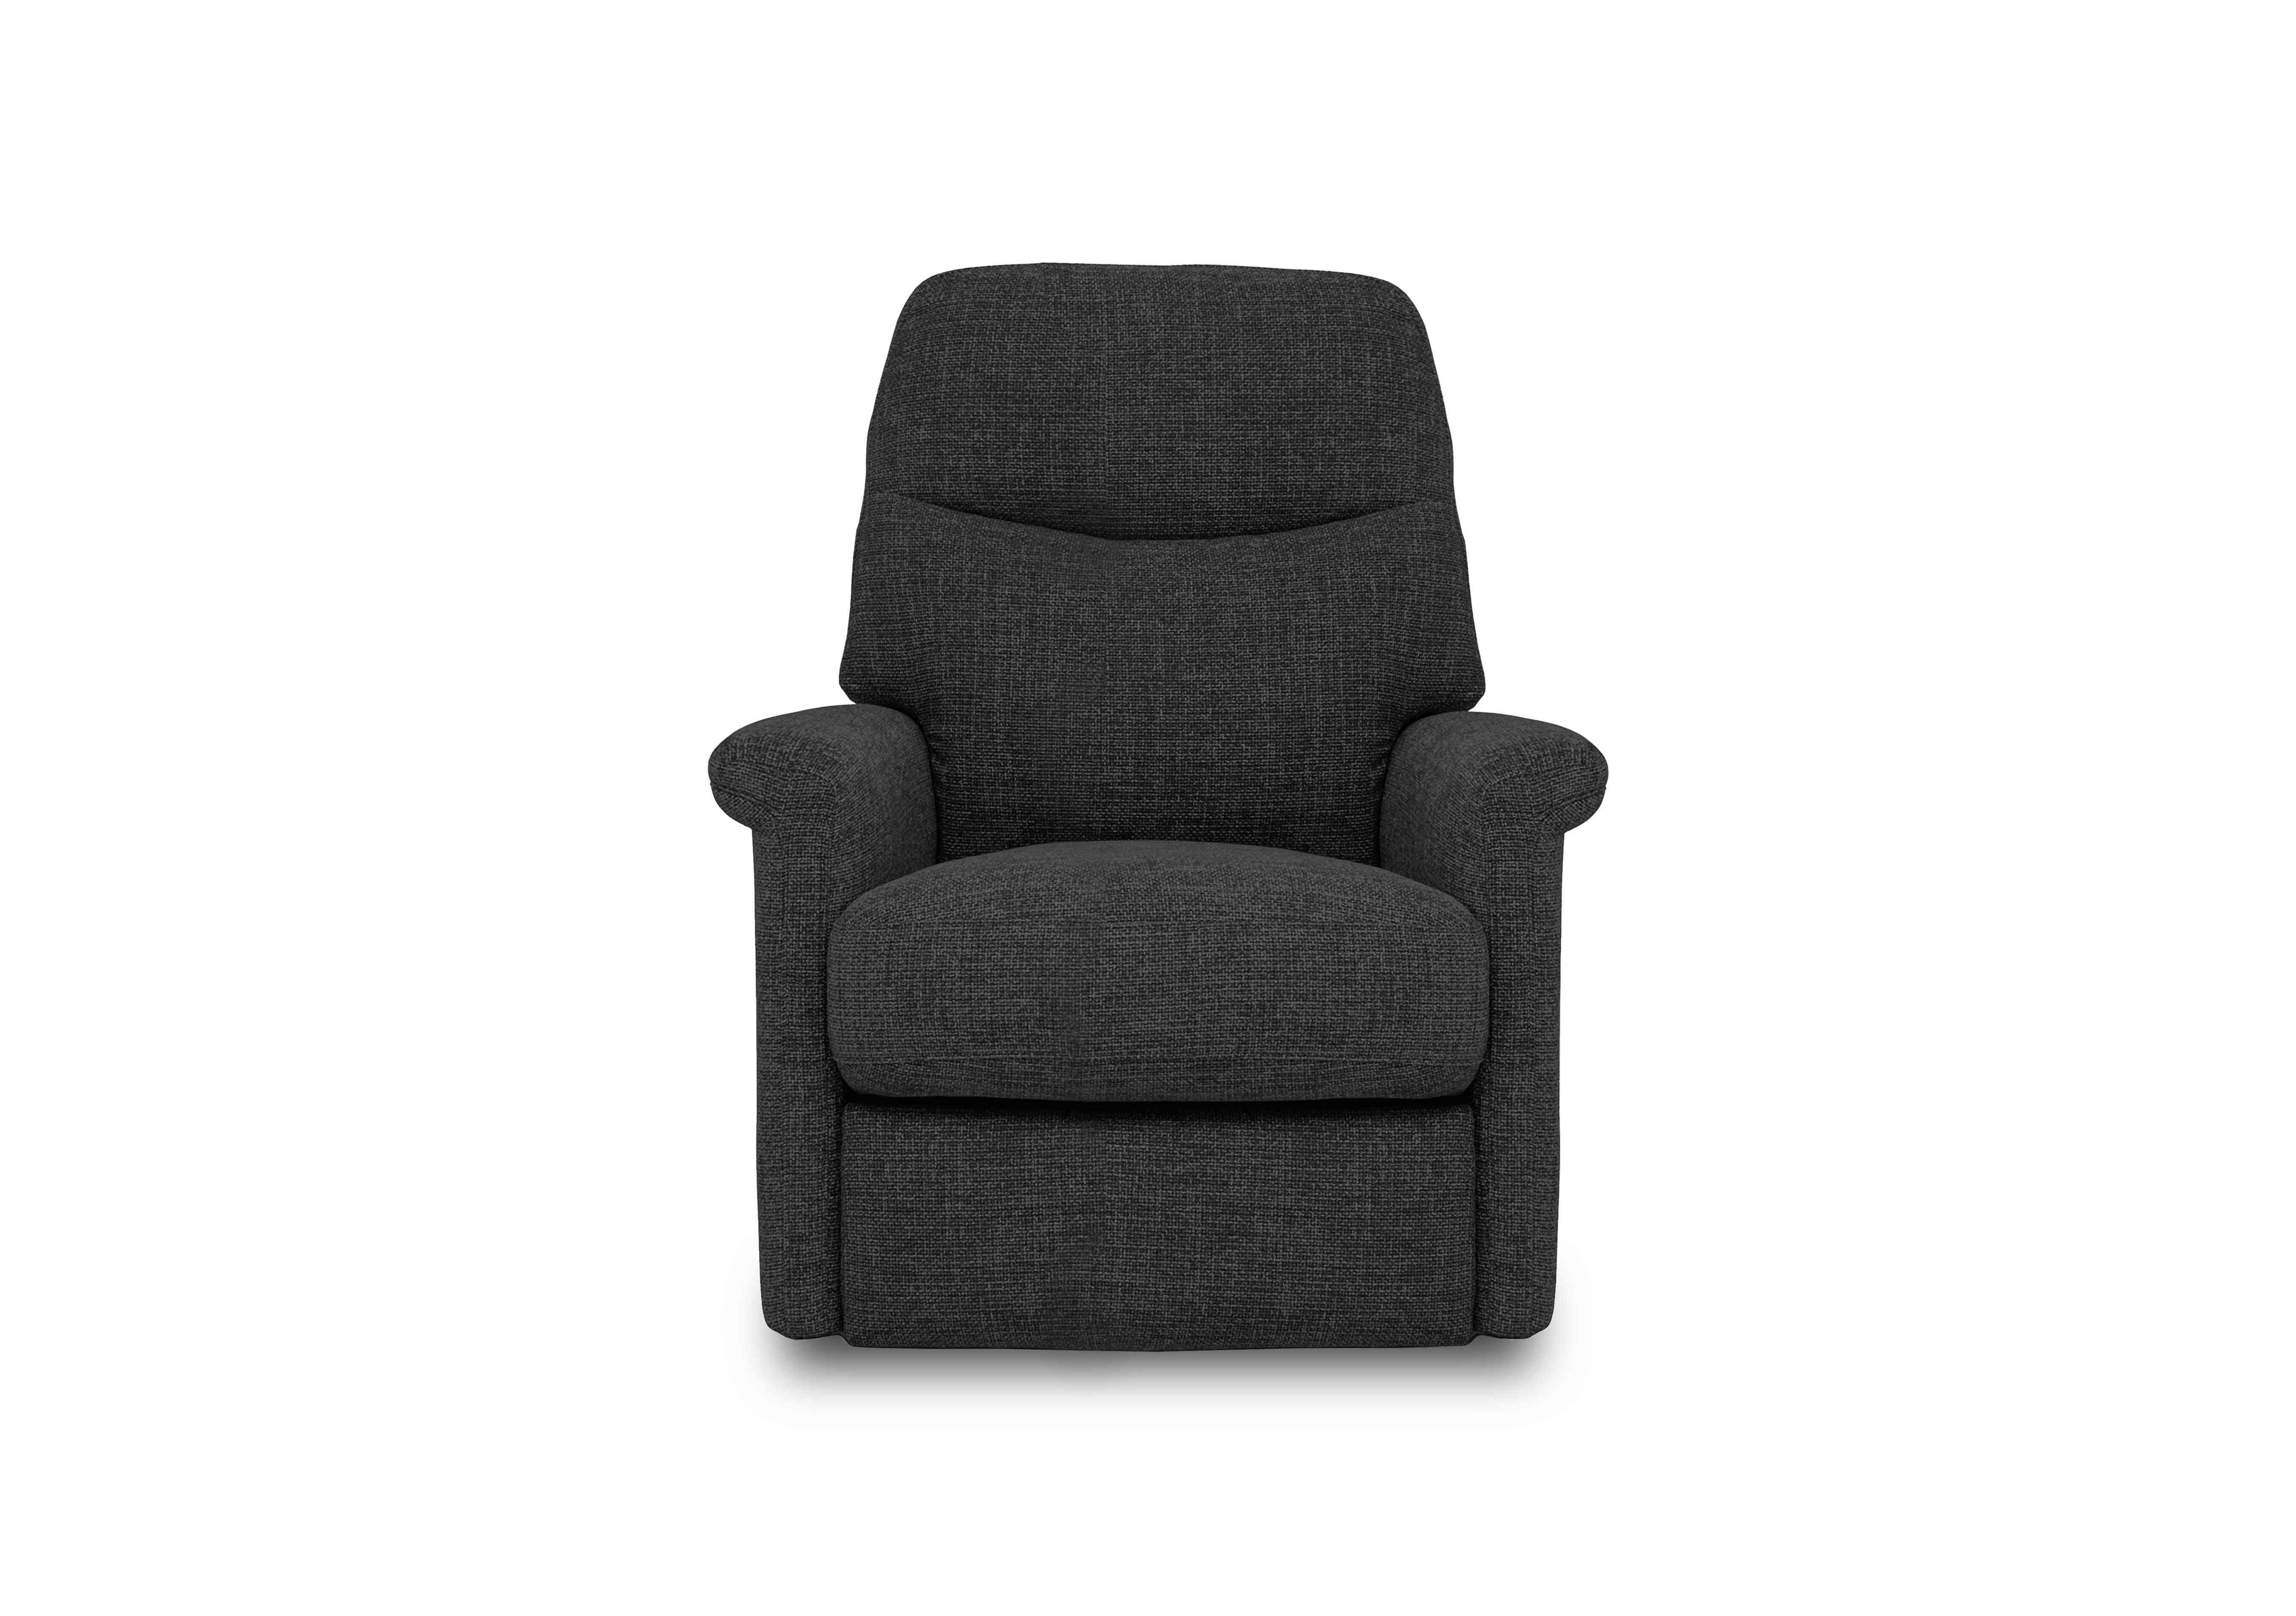 Compact Collection Lille Fabric Rocker Swivel Chair with Power Recliner in Fab-Cac-R463 Black Mica on Furniture Village